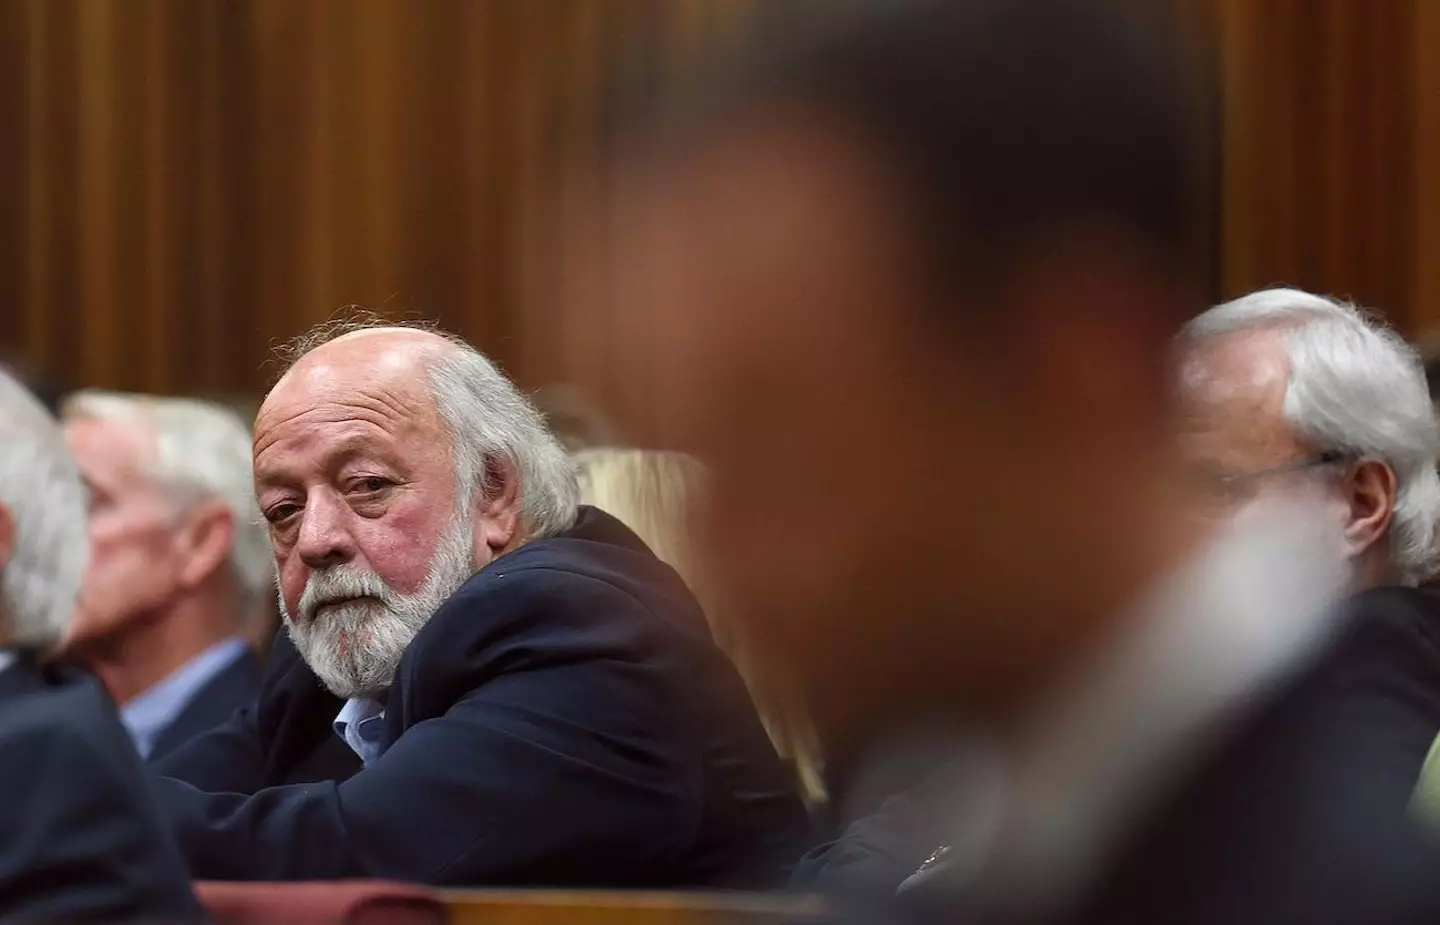 The 35-year-old is now set for talks with Reeva's father, Barry Steenkamp.